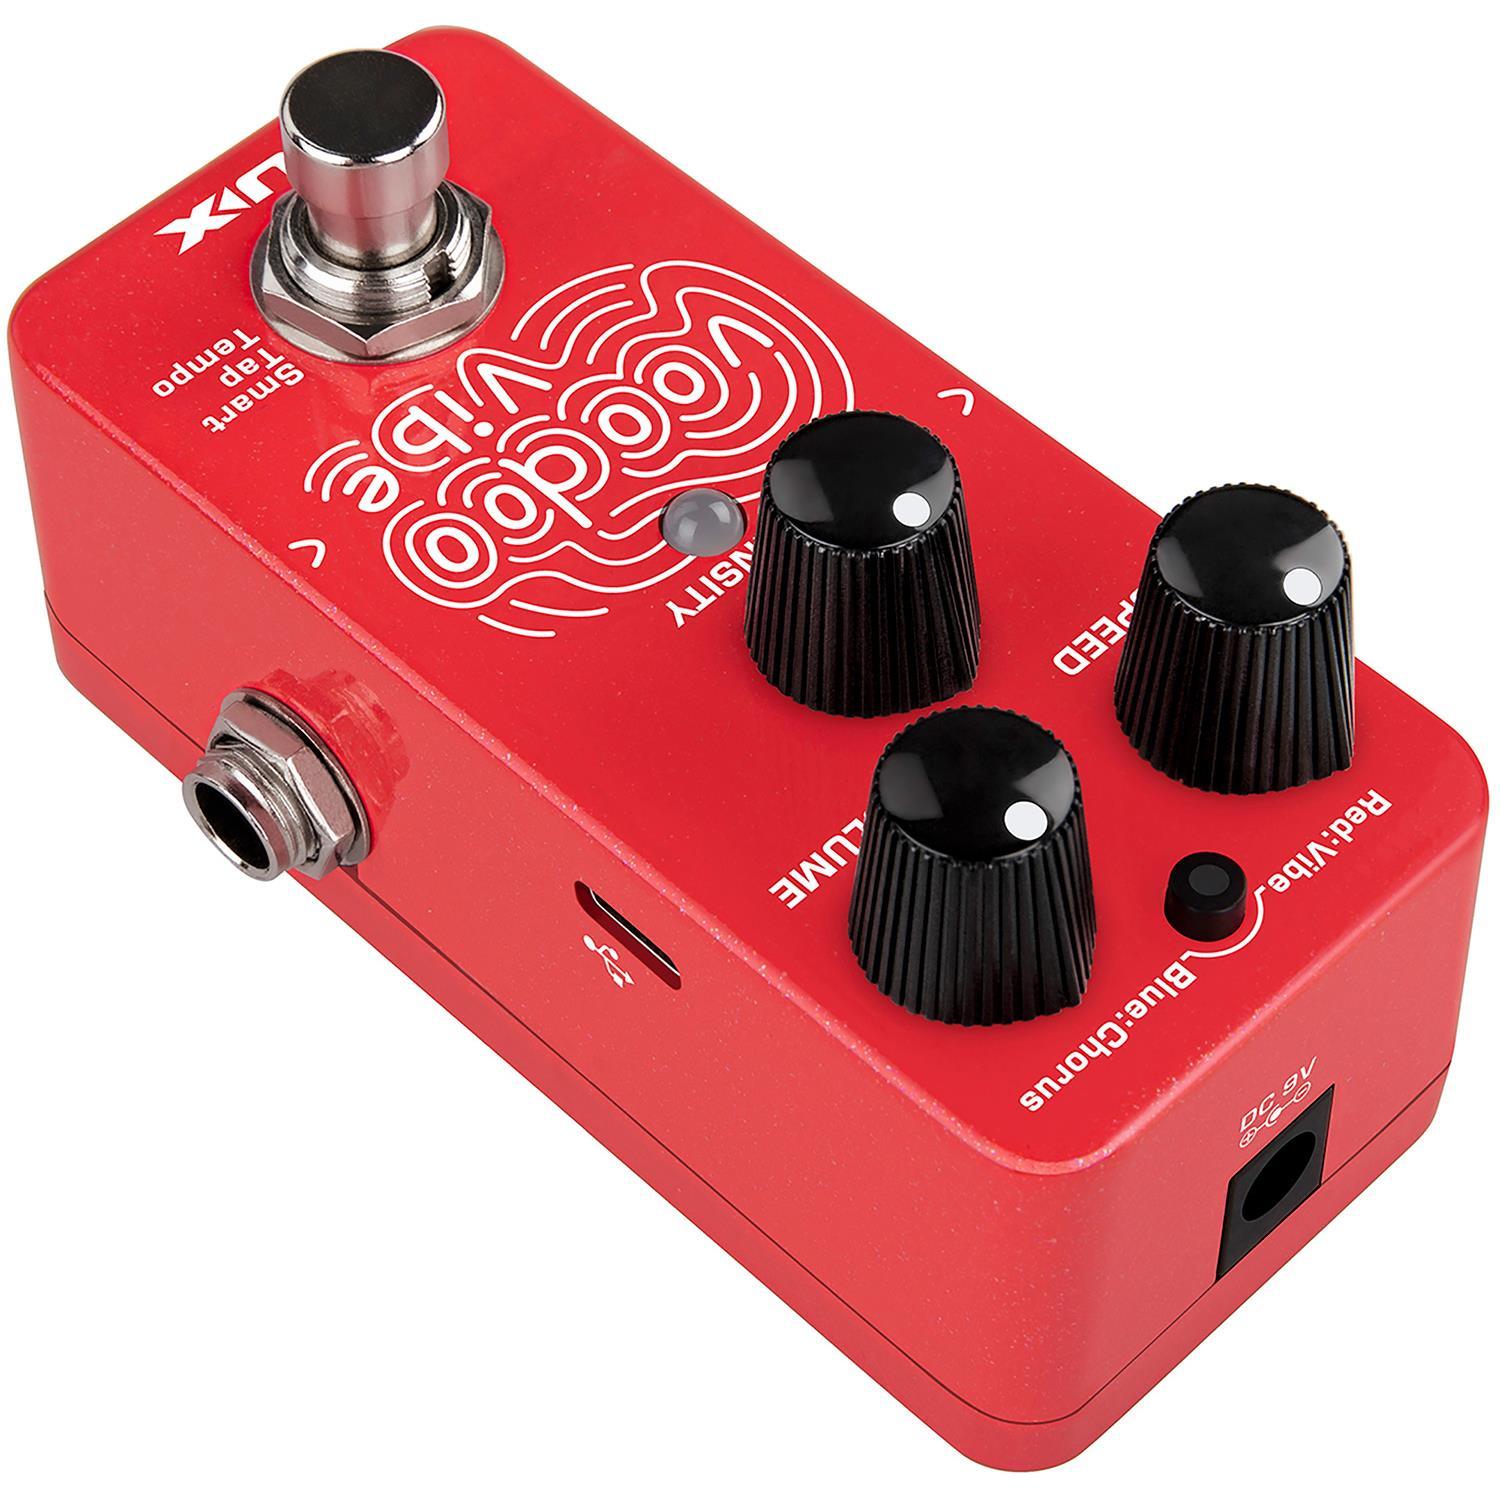 NUX Voodoo Vibe Mini Effect Pedal - DY Pro Audio